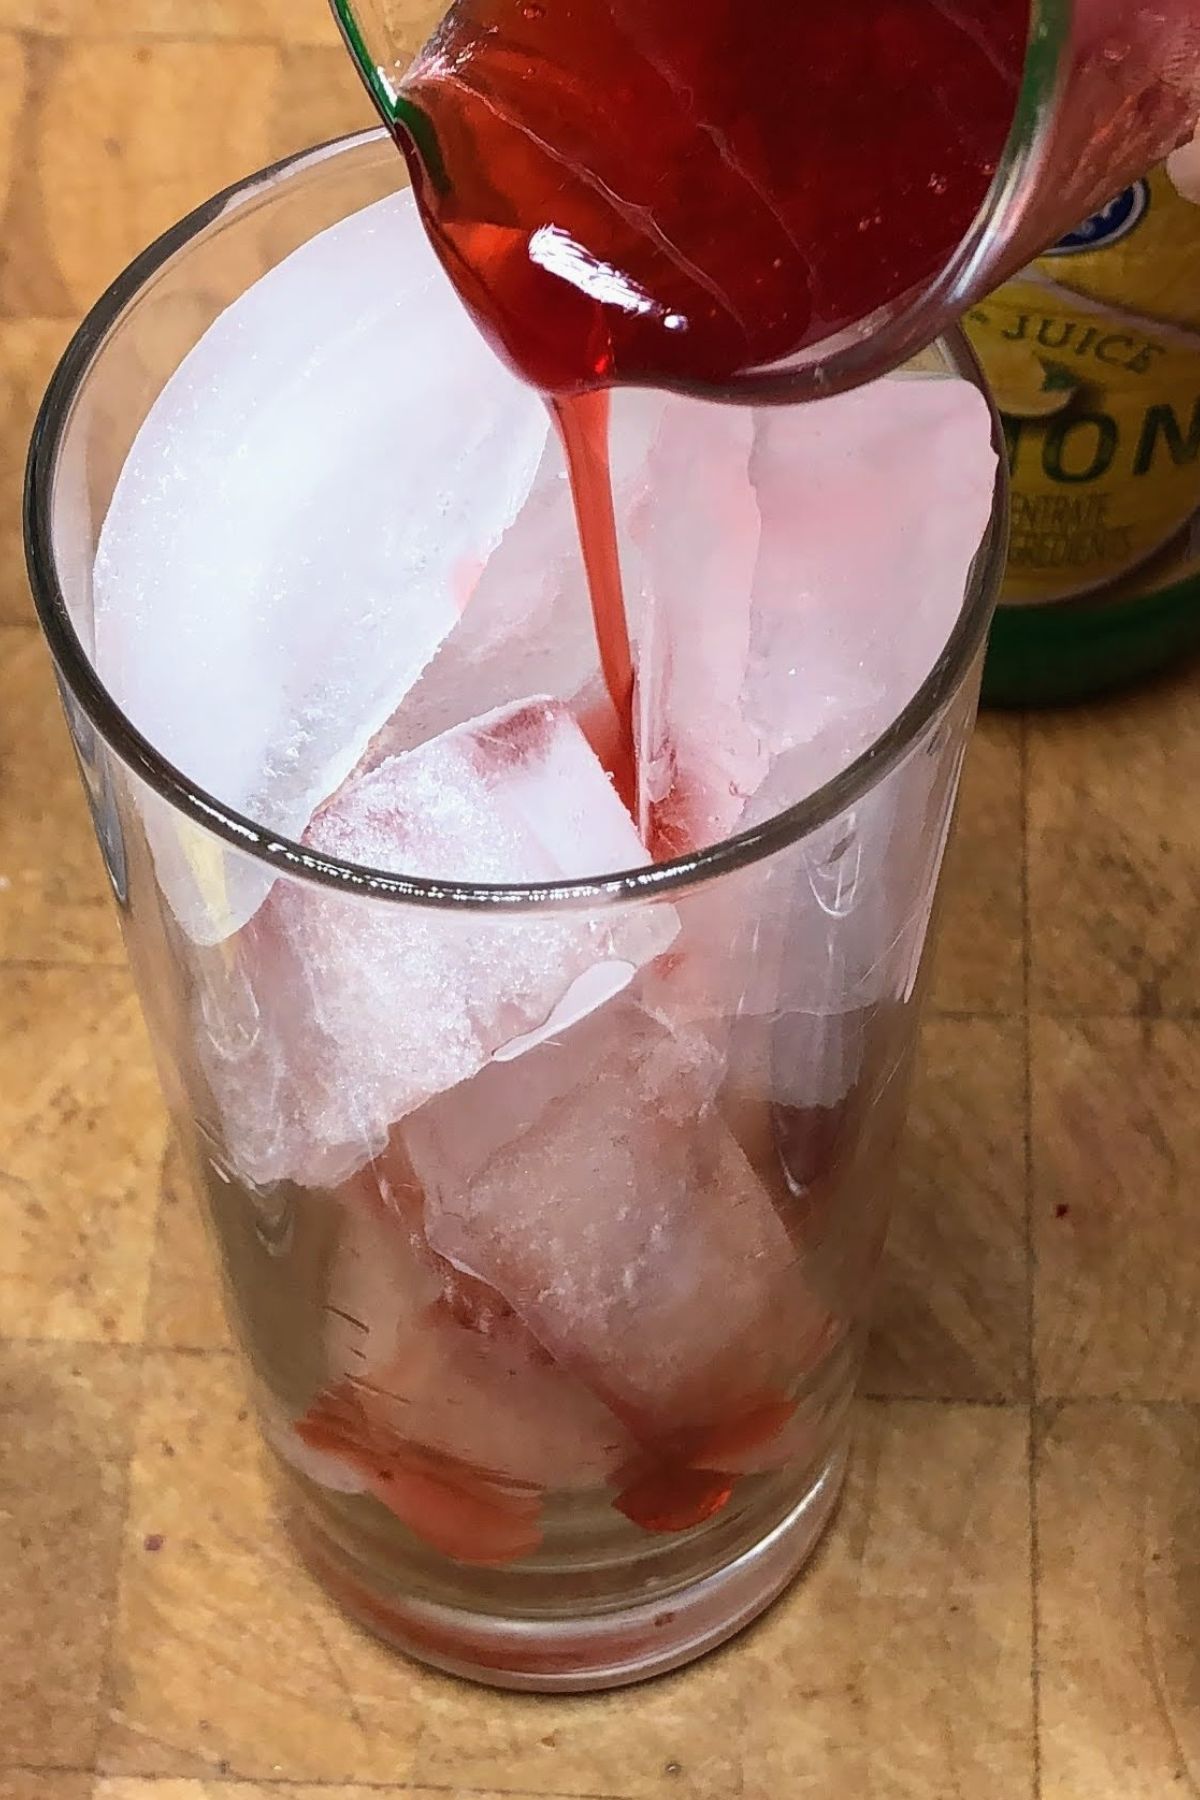 Pouring strawberry simple syrup into a glass.